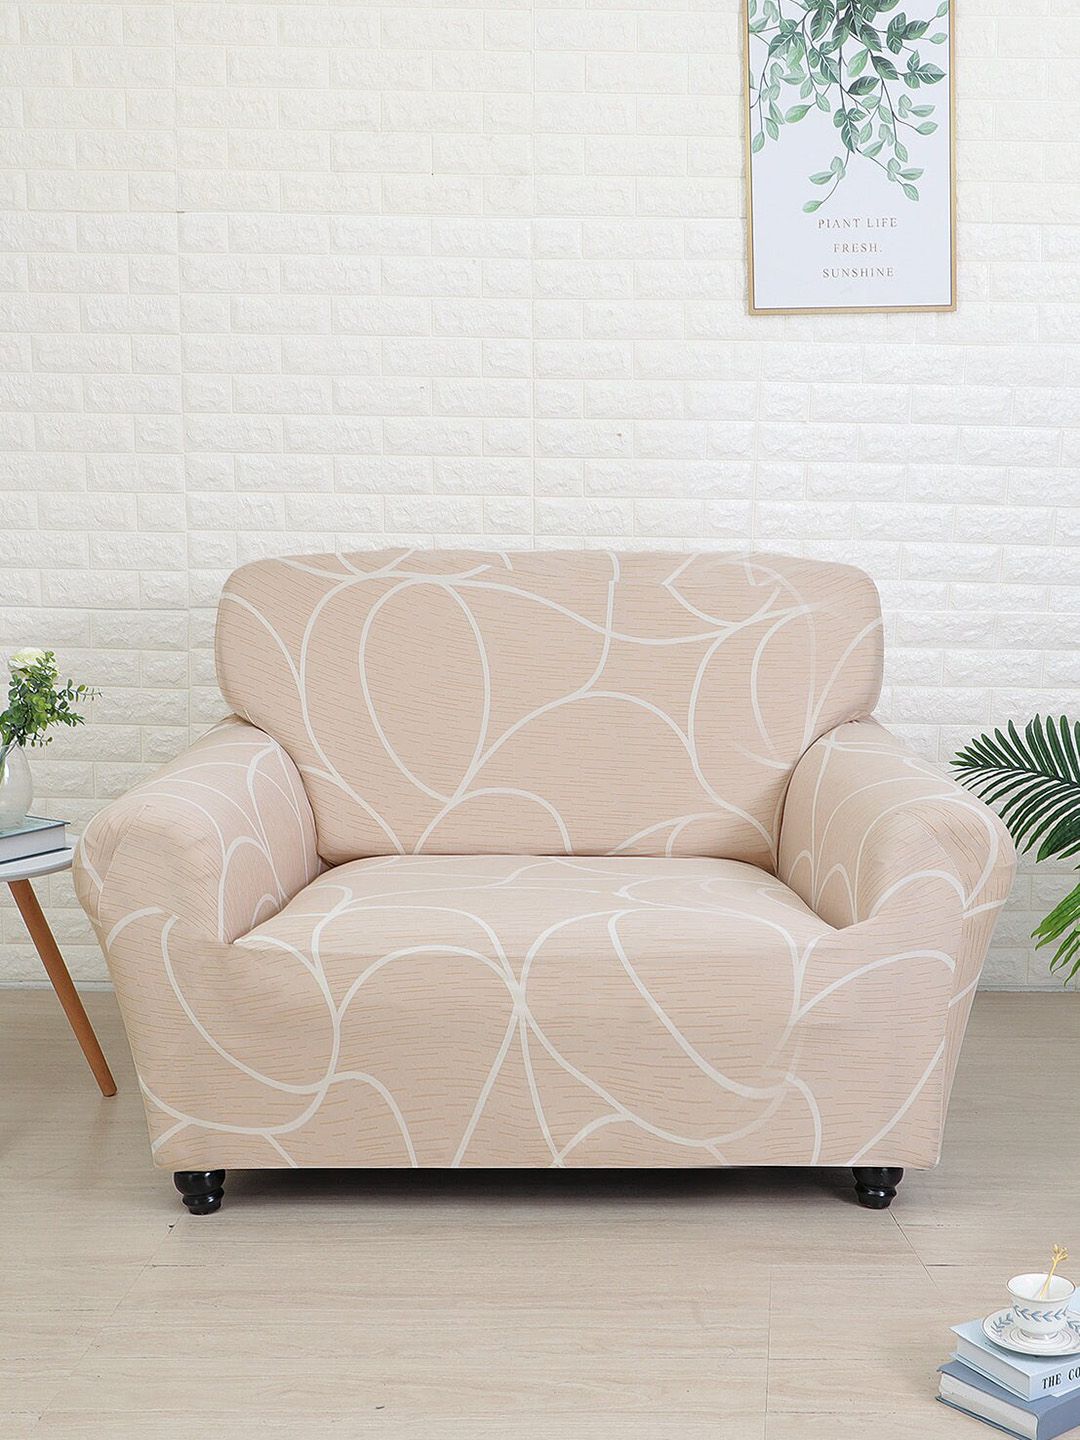 Athome by Nilkamal Peach-Coloured & White Printed 2 Seater Sofa Covers Price in India